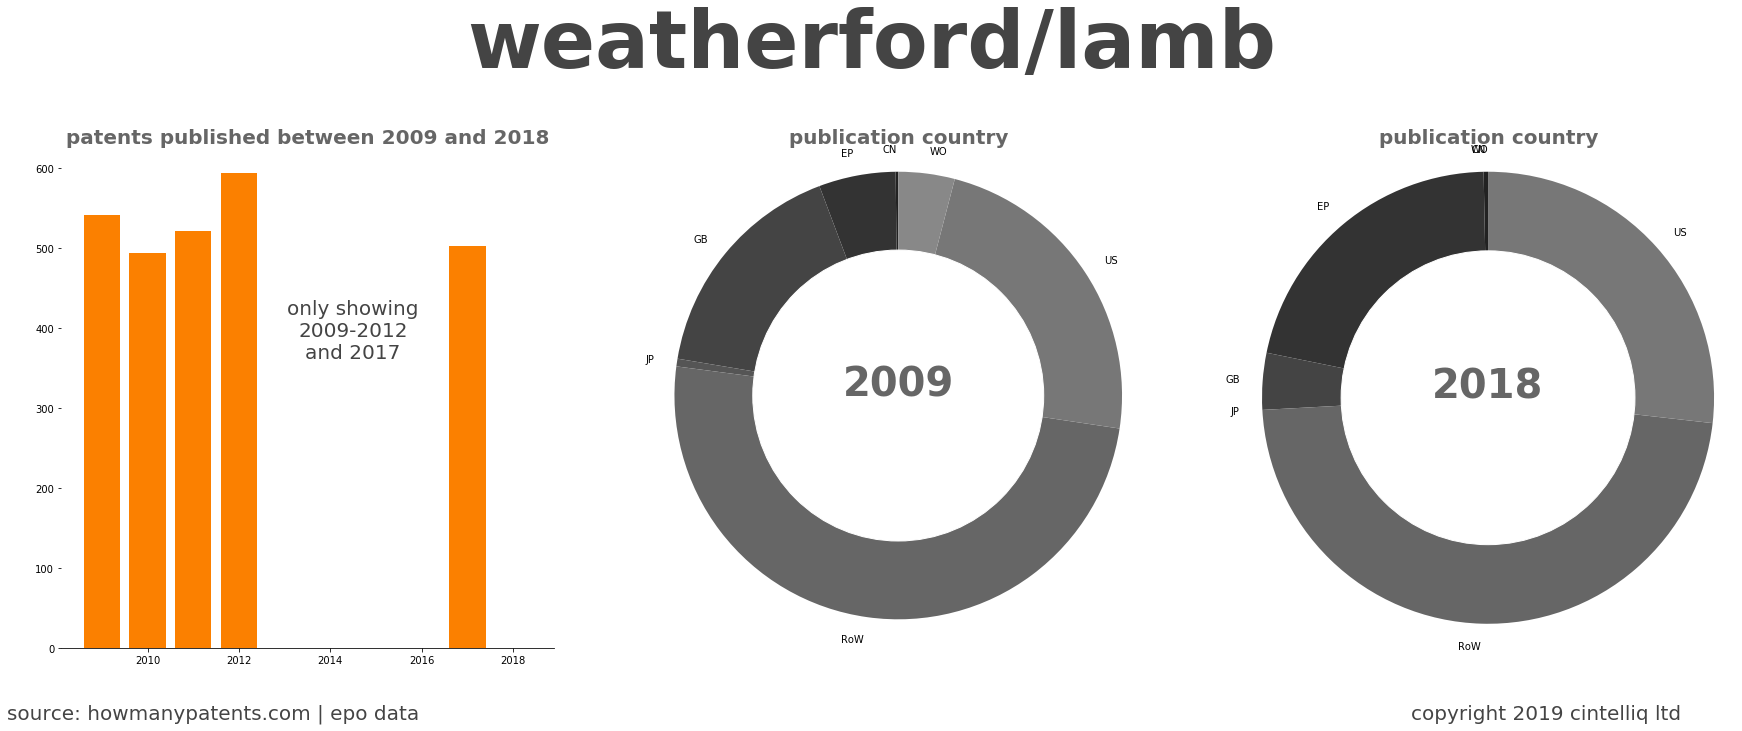 summary of patents for Weatherford/Lamb